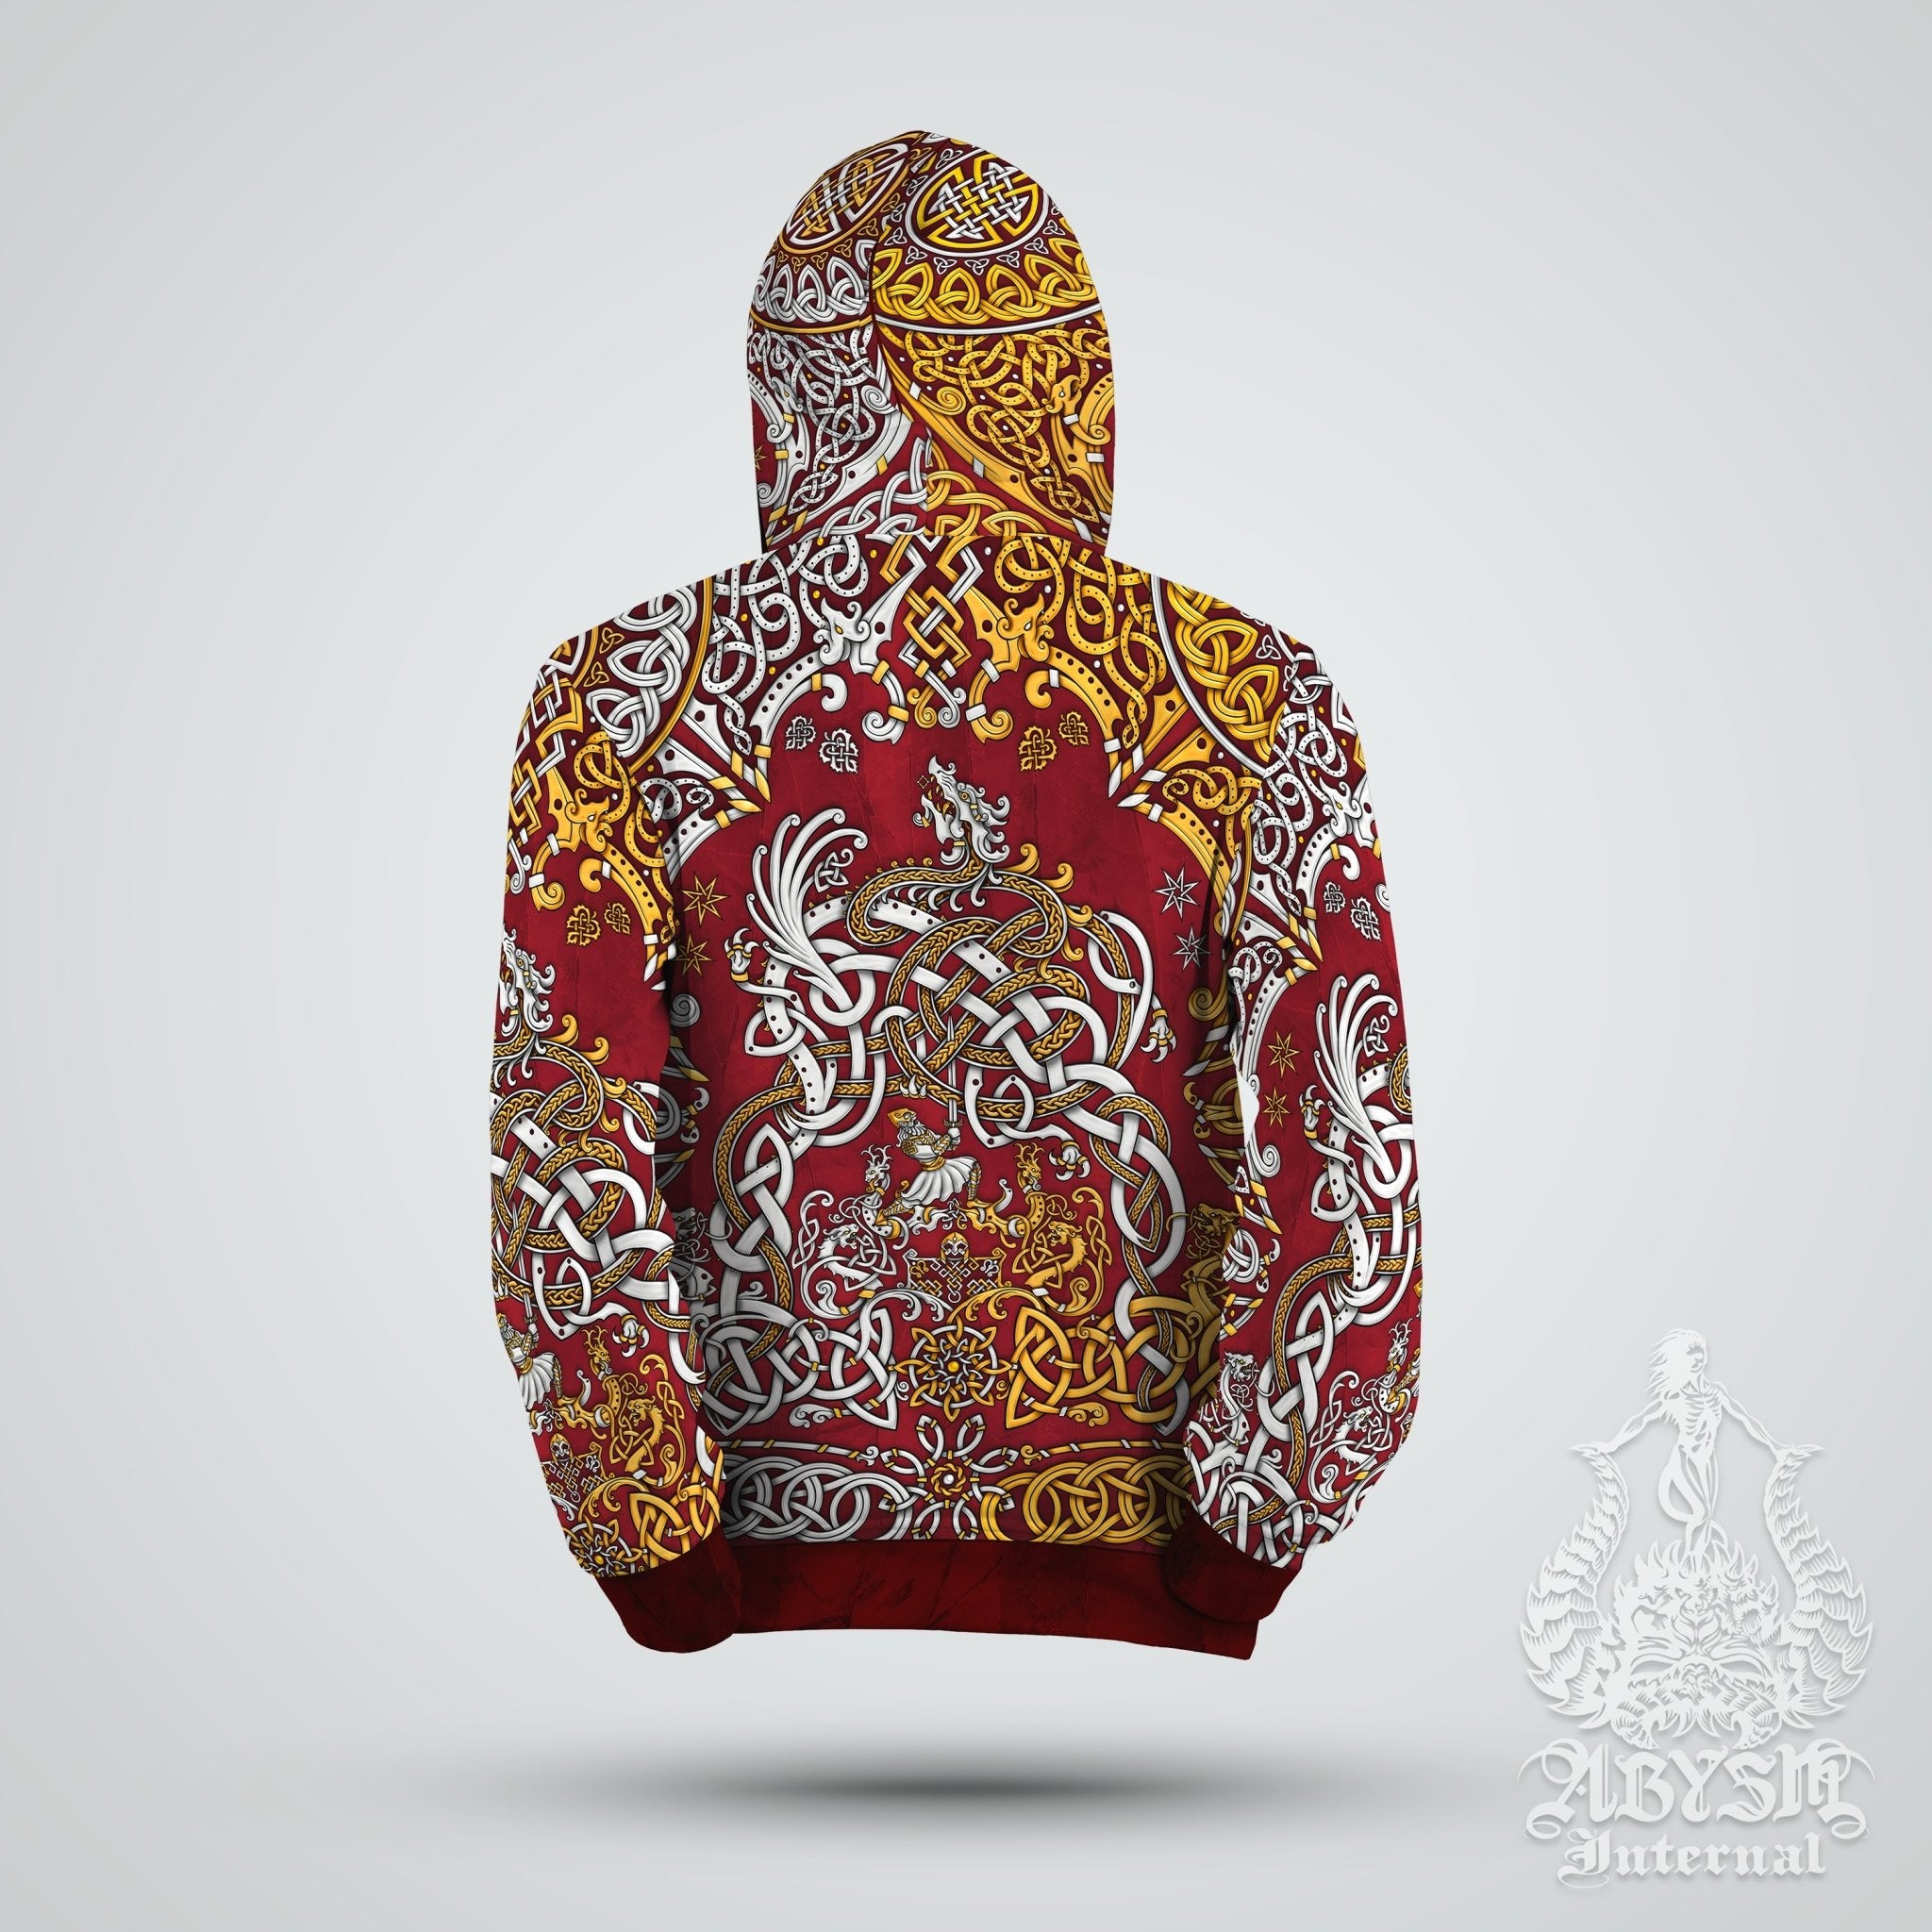 Viking Hoodie, Nordic At Sweater, Fantasy Street Outfit, Norse Streetwear, Alternative Clothing, Unisex - Dragon Fafnir, Gold Red - Abysm Internal